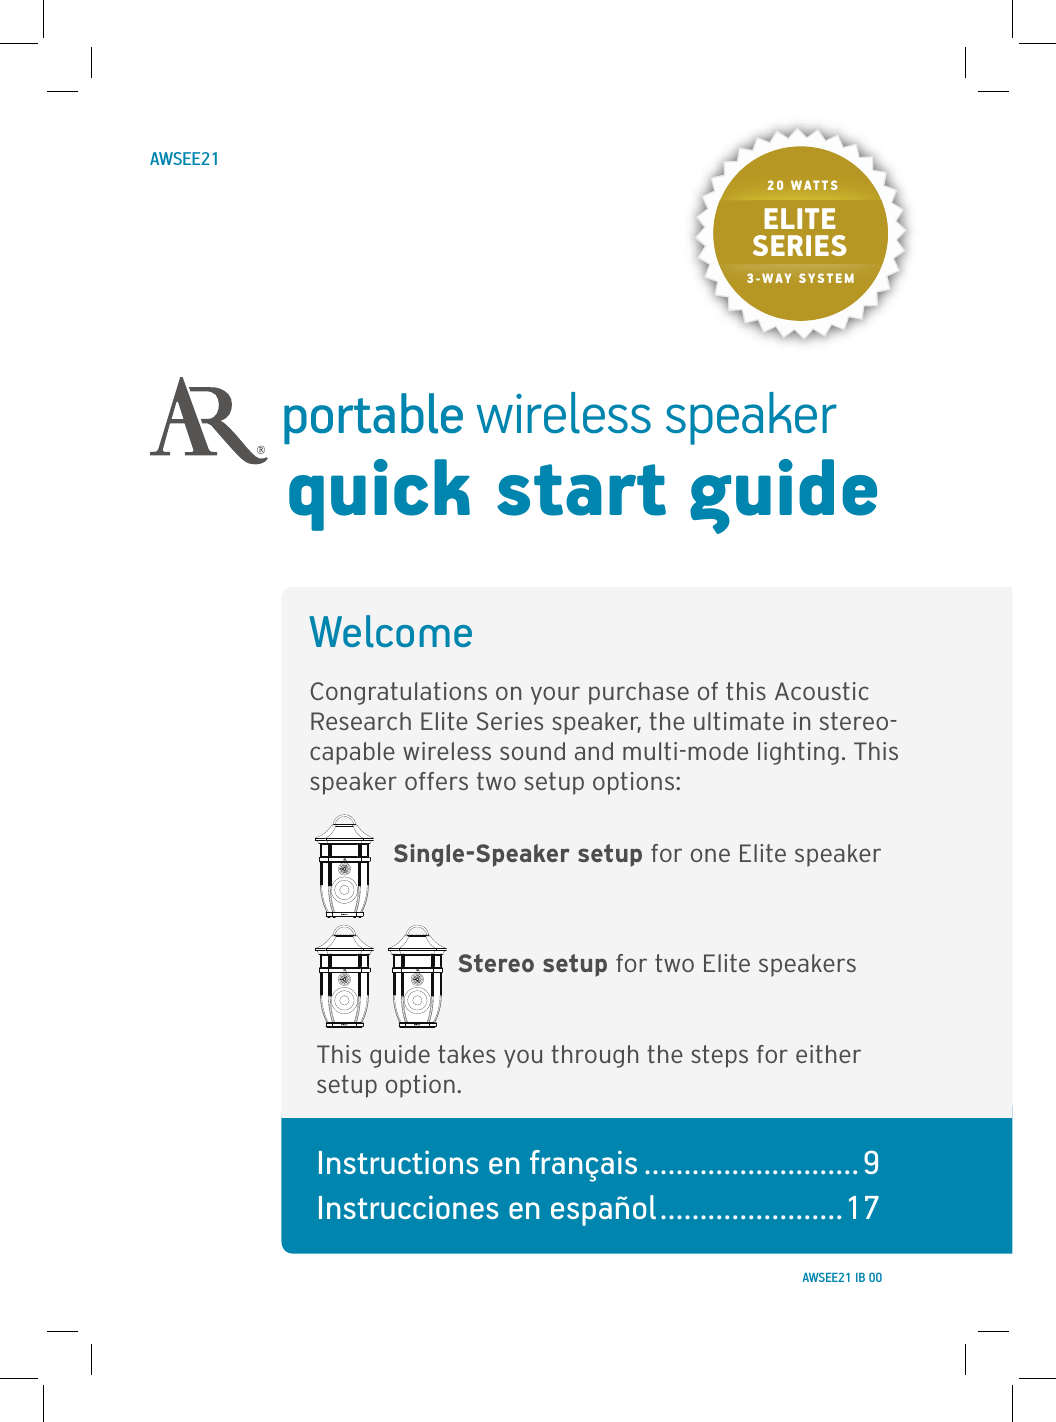 portable wireless speakerquick start guideWelcomeCongratulations on your purchase of this Acoustic Research Elite Series speaker, the ultimate in stereo-capable wireless sound and multi-mode lighting. This speaker offers two setup options:Single-Speaker setup for one Elite speakerStereo setup for two Elite speakersThis guide takes you through the steps for either setup option.AWSEE21Instructions en français ...........................9 Instrucciones en español .......................17ELITESERIES20 WATTS3-WAY SYSTEMAWSEE21 IB 00